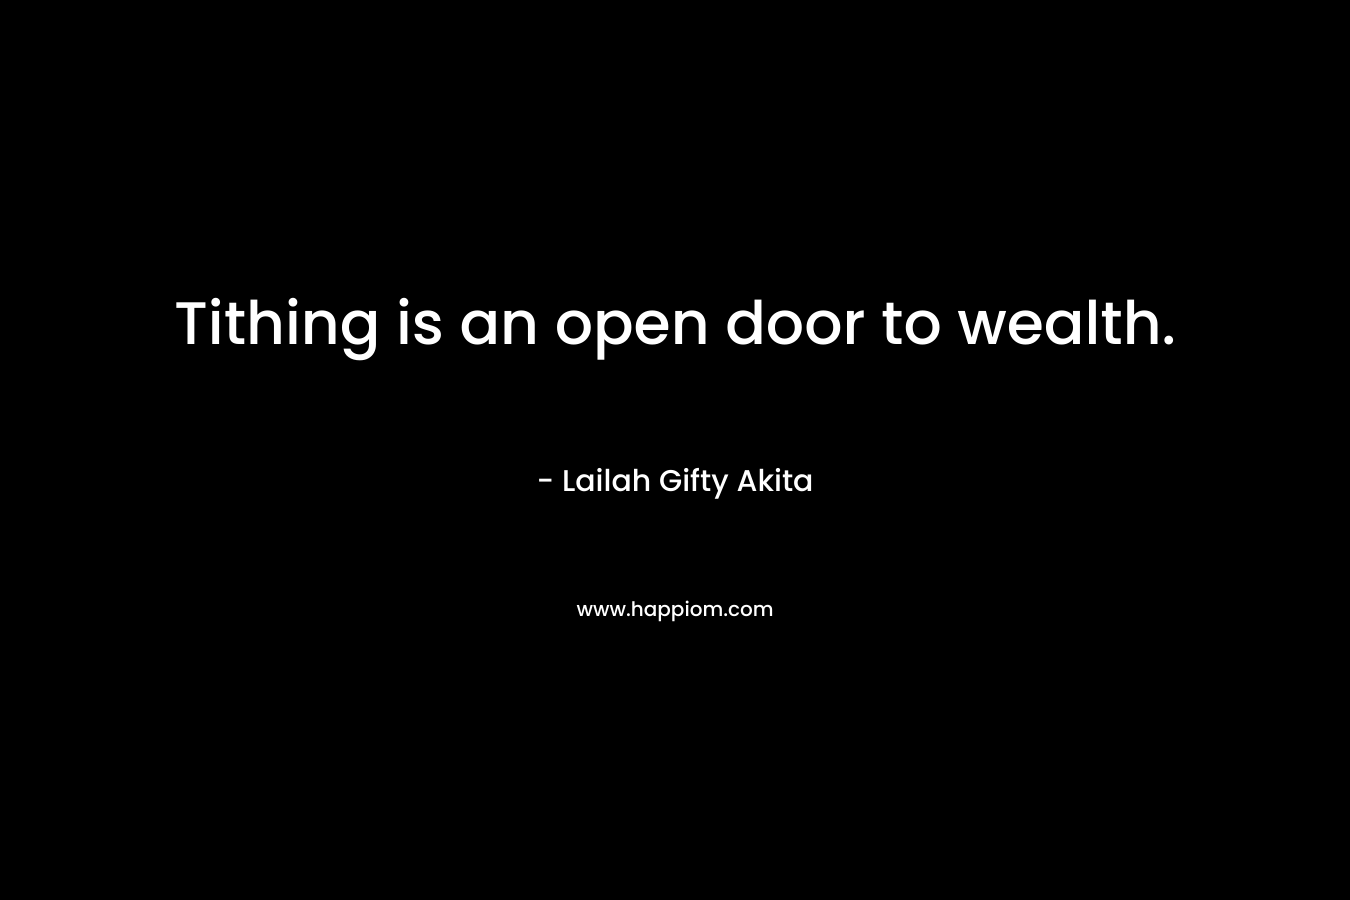 Tithing is an open door to wealth. – Lailah Gifty Akita